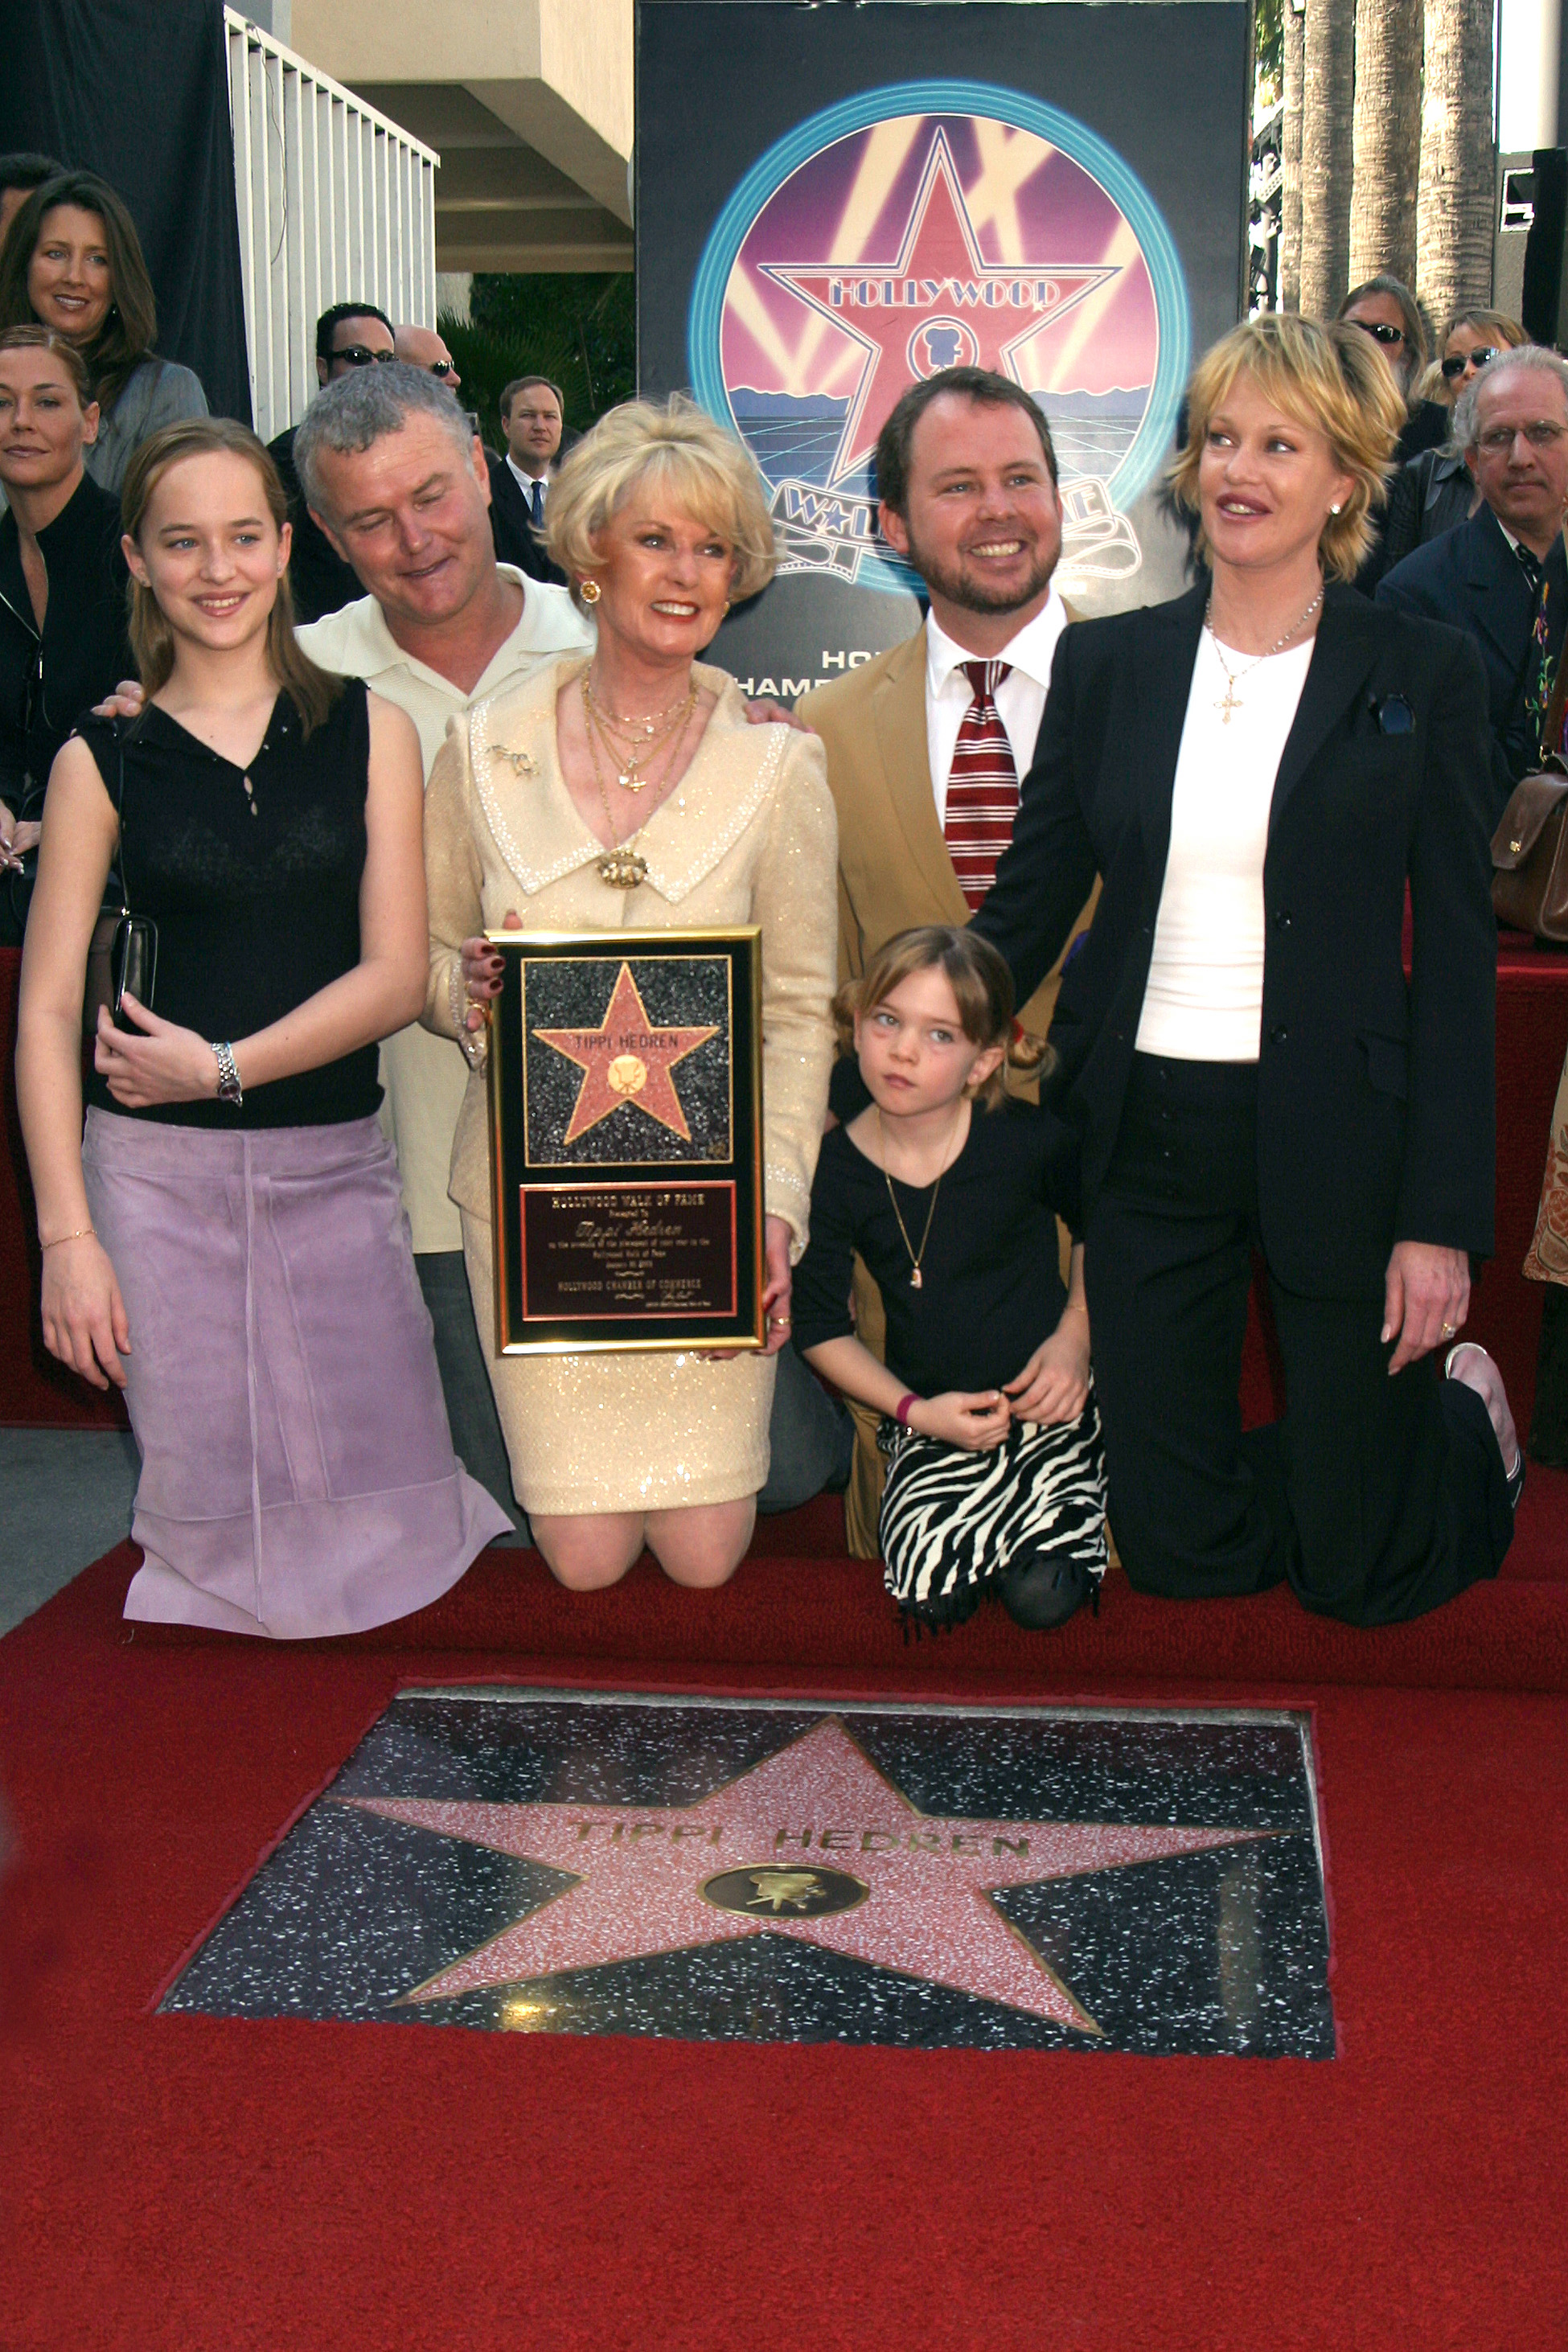 Tippy Hedren and Melanie Griffith and her daughters Dakota and Stella attending the dedication of a Star on the Hollywood Walk of Fame for Tippi Hedren in Hollywood, California, on January 30, 2003. | Source: Getty Images